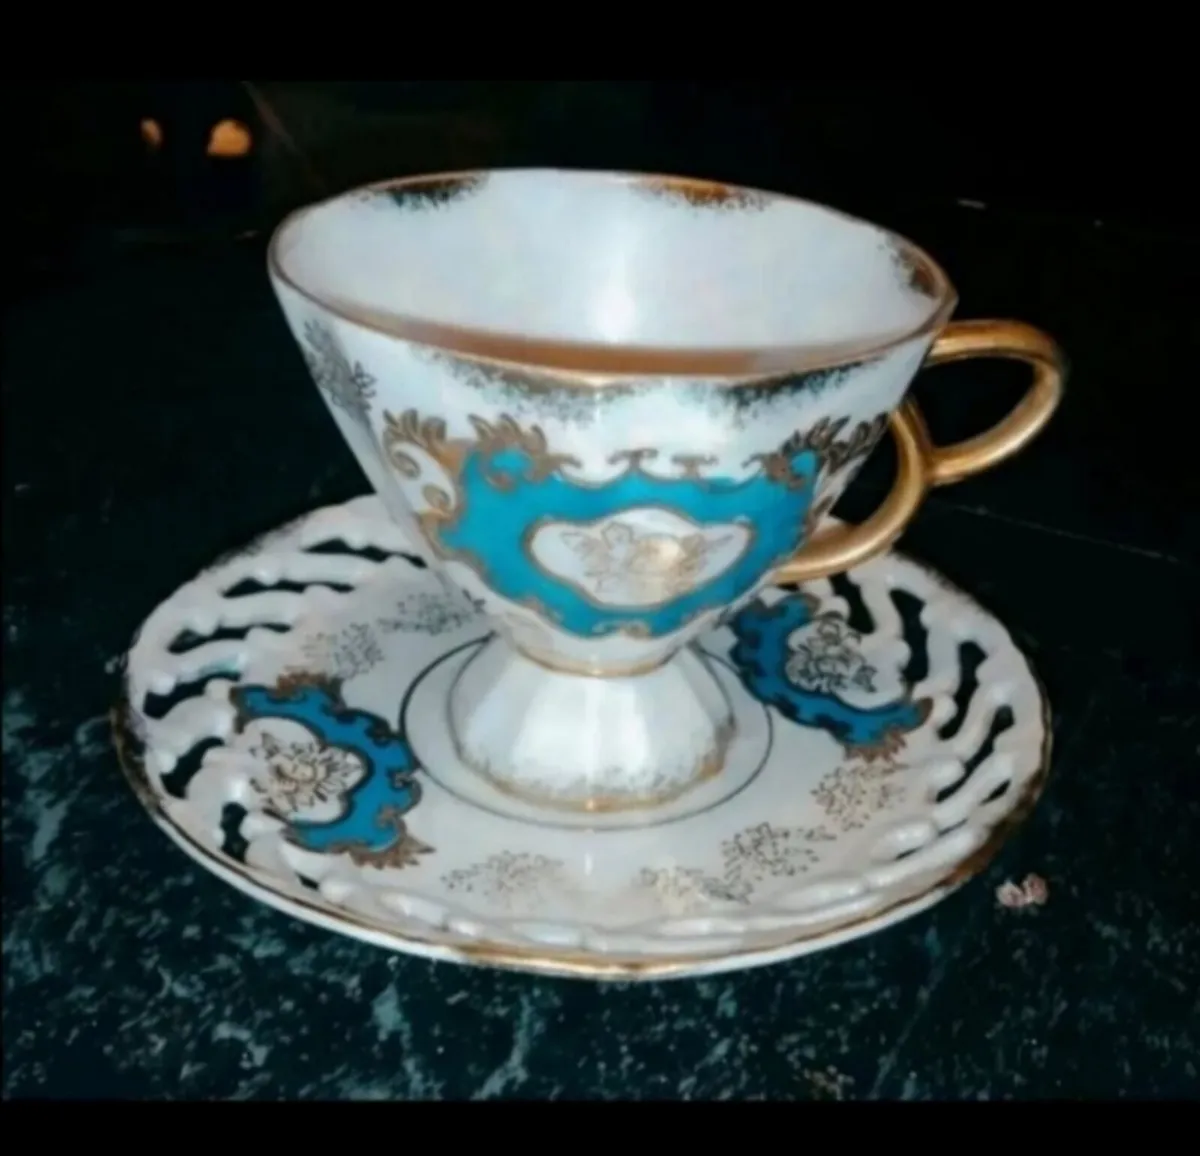 Antique Japanese tea cup and saucer - Image 1